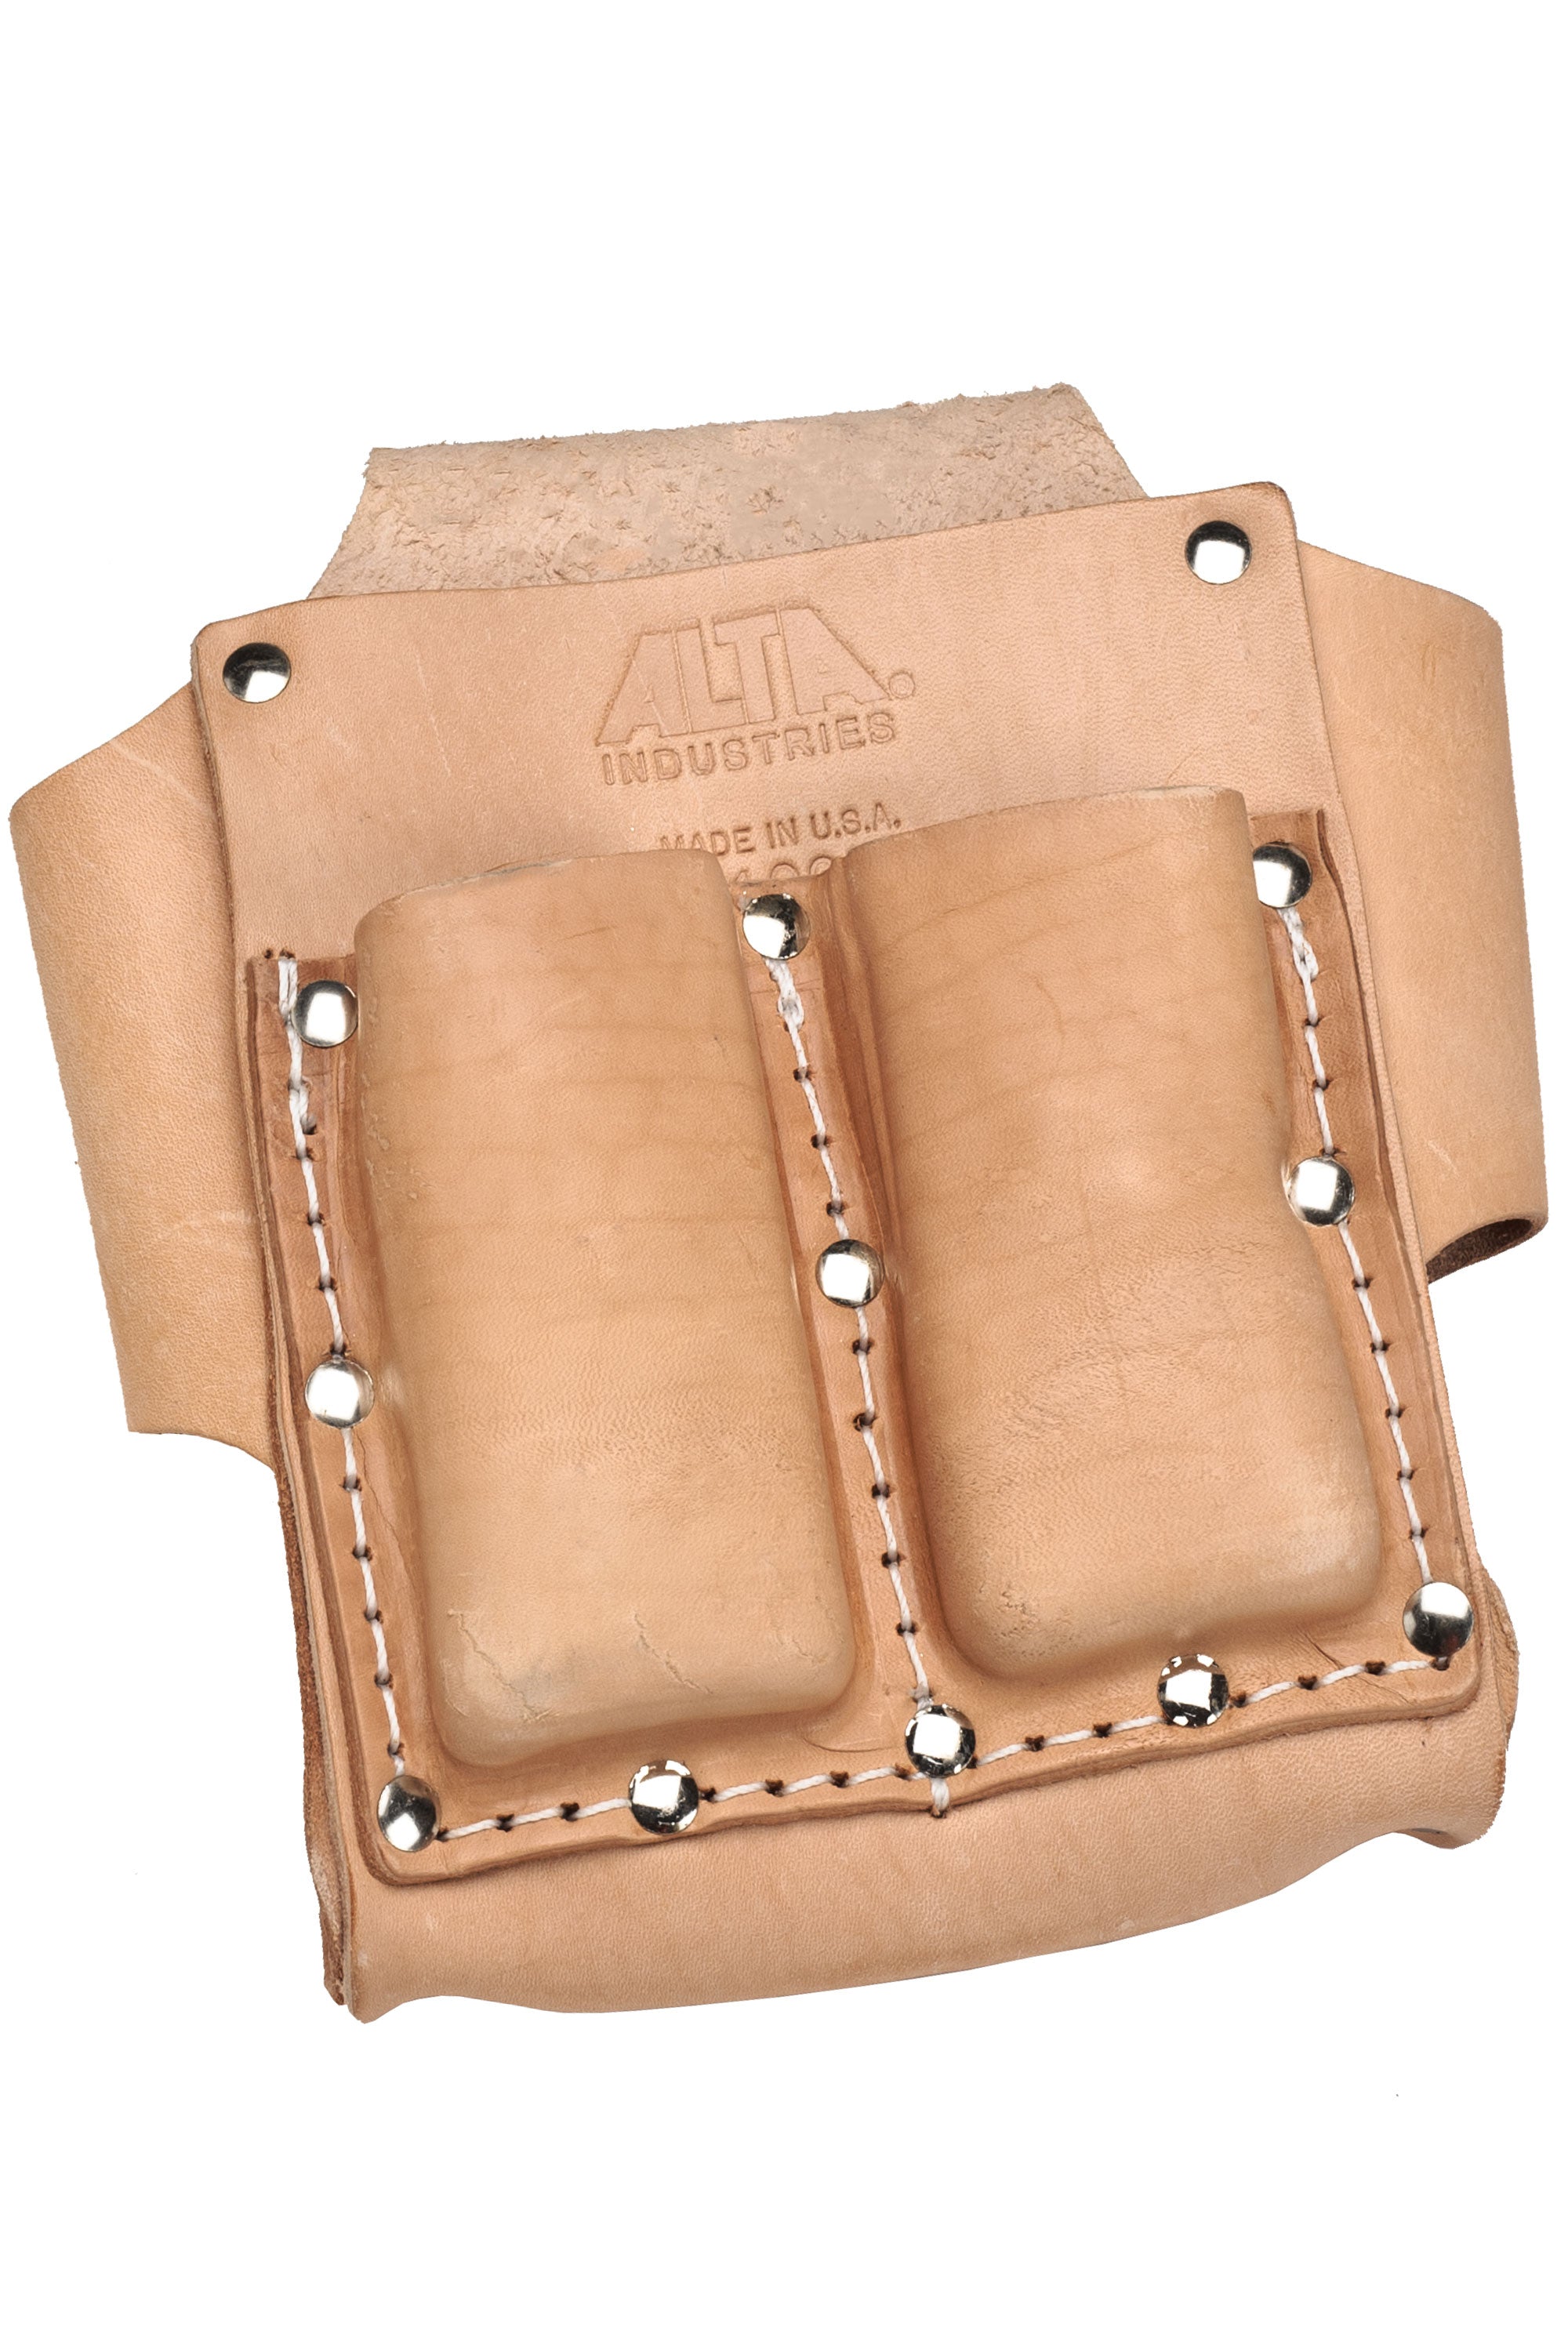 2 Bags -10 Pocket OIL TAN LEATHER Carpenter Nail and Tool Pouch bags waist  belt